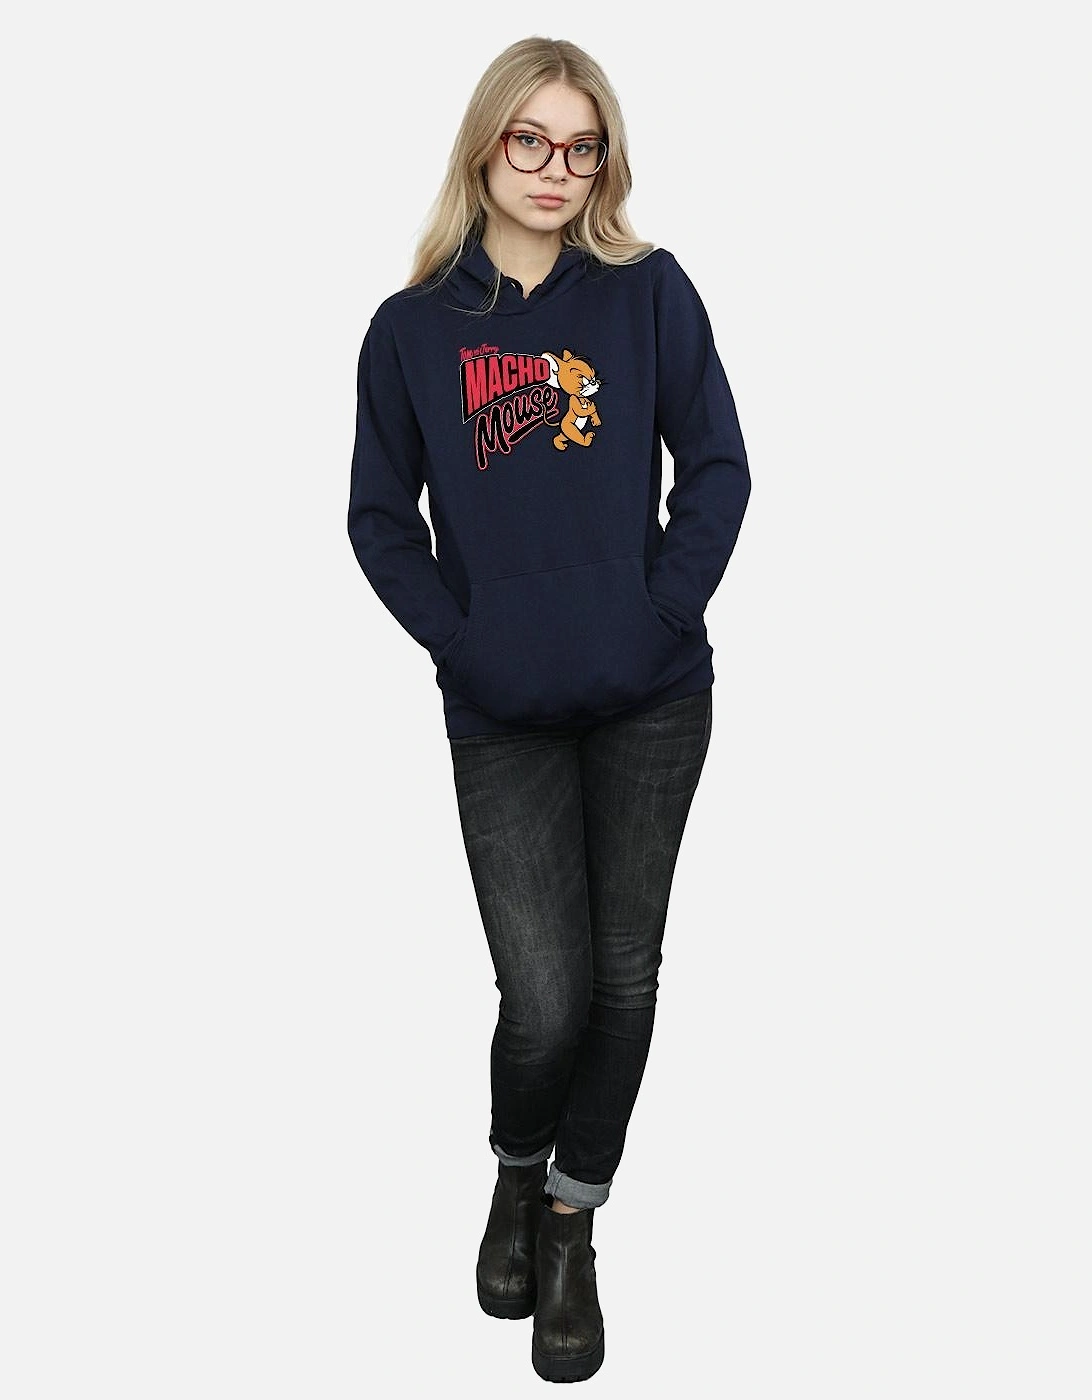 Tom And Jerry Womens/Ladies Macho Mouse Hoodie